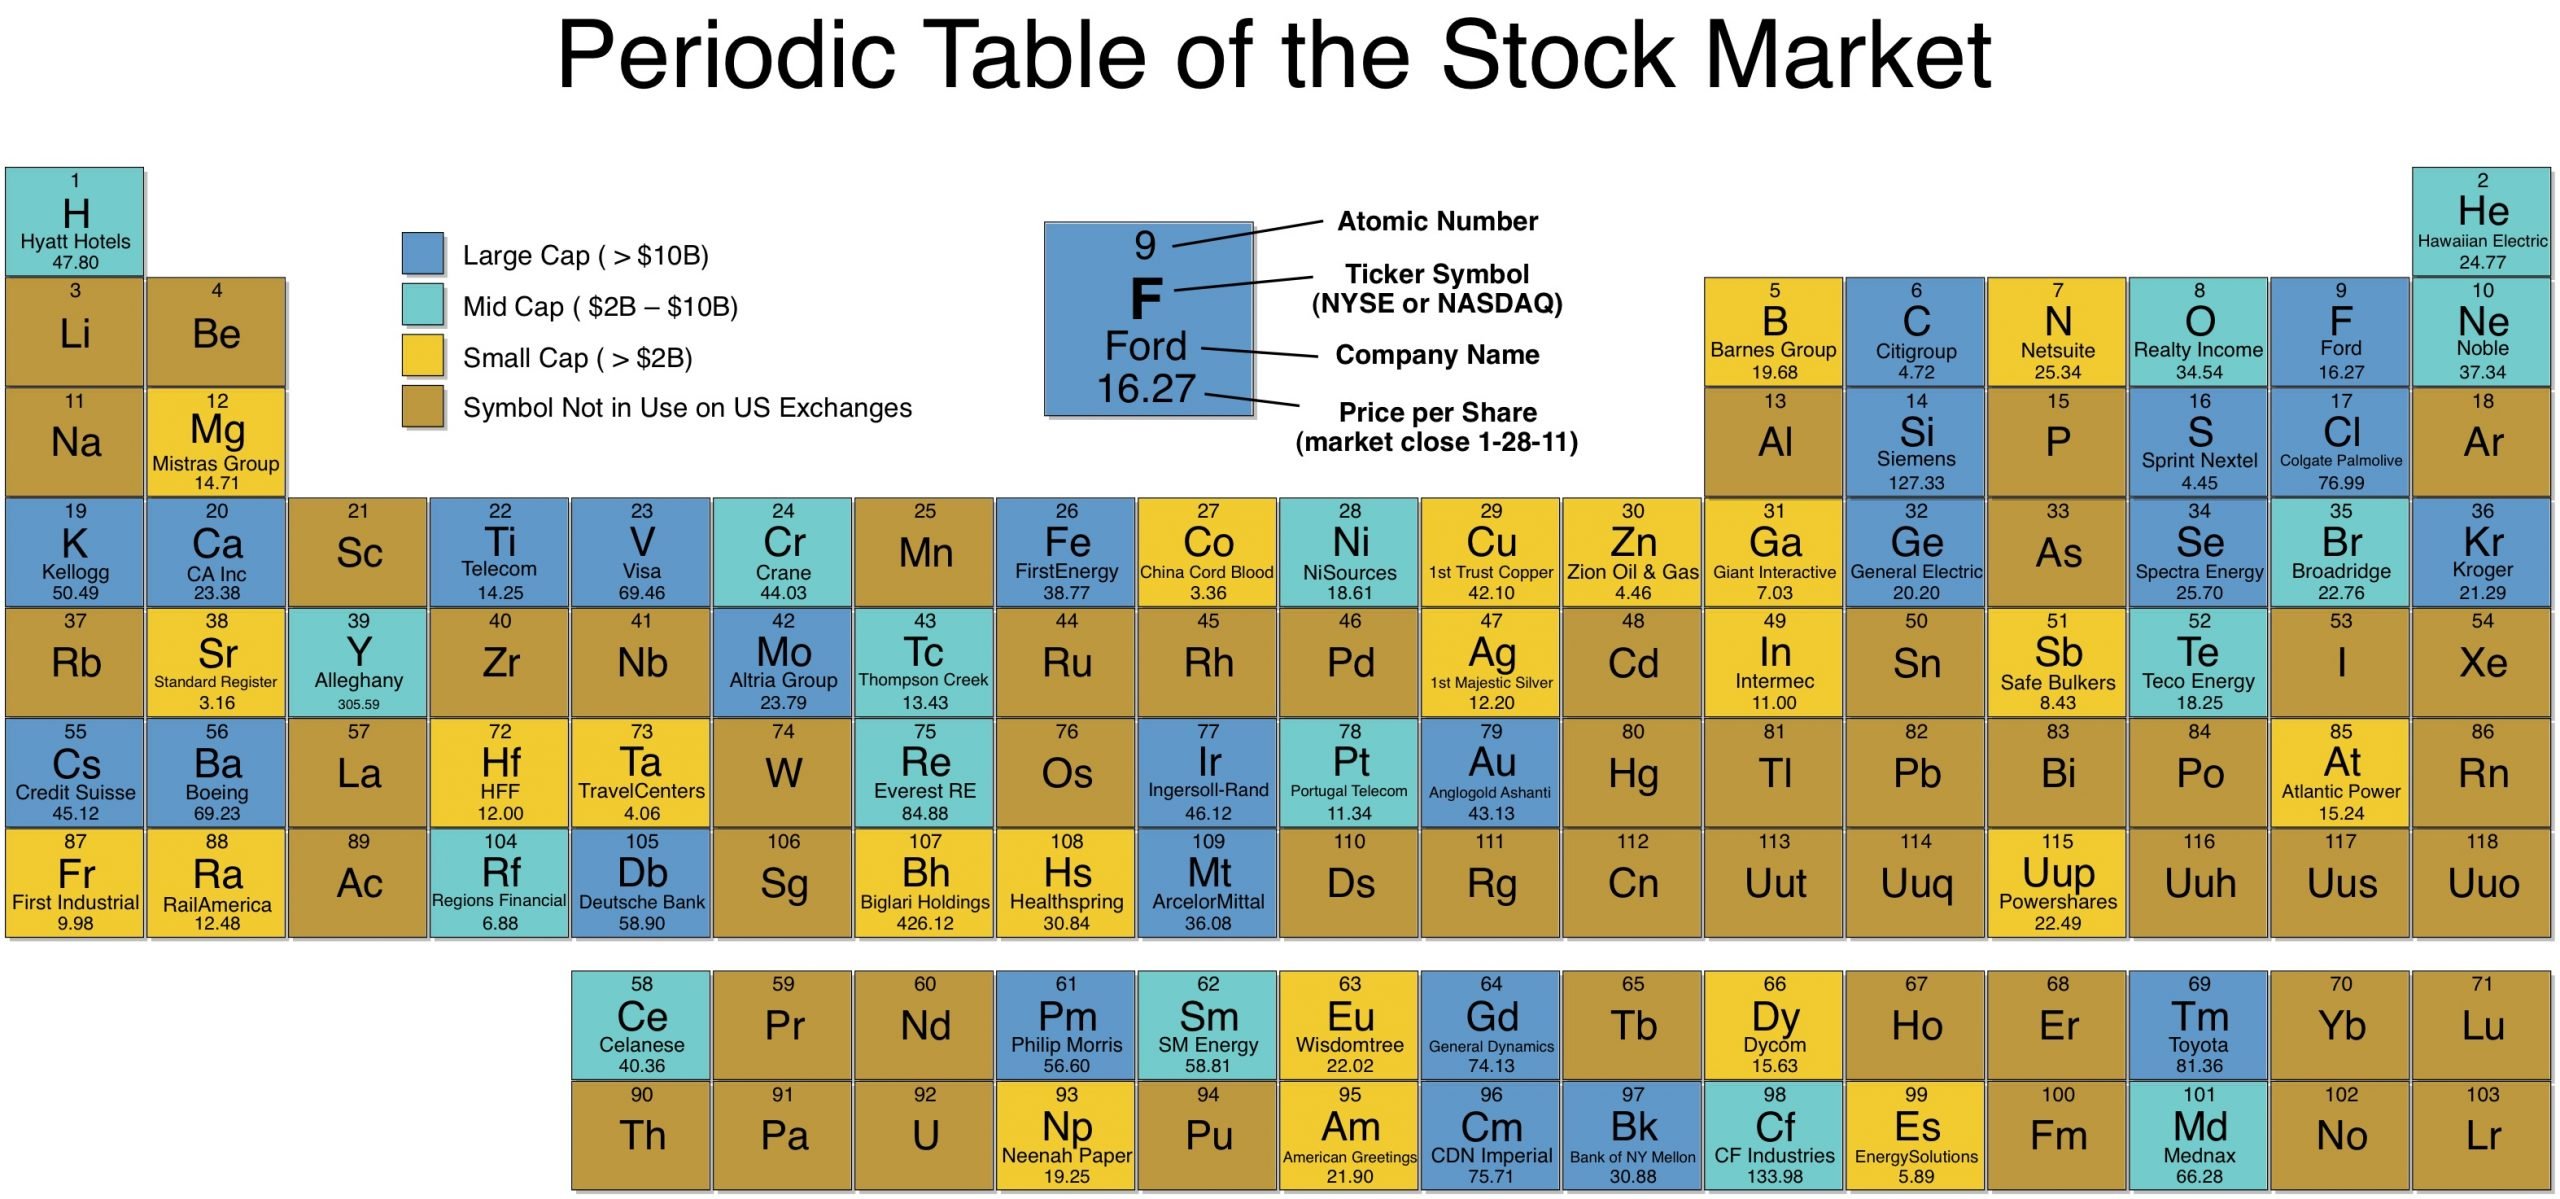 Periodic Table of the Stock Market